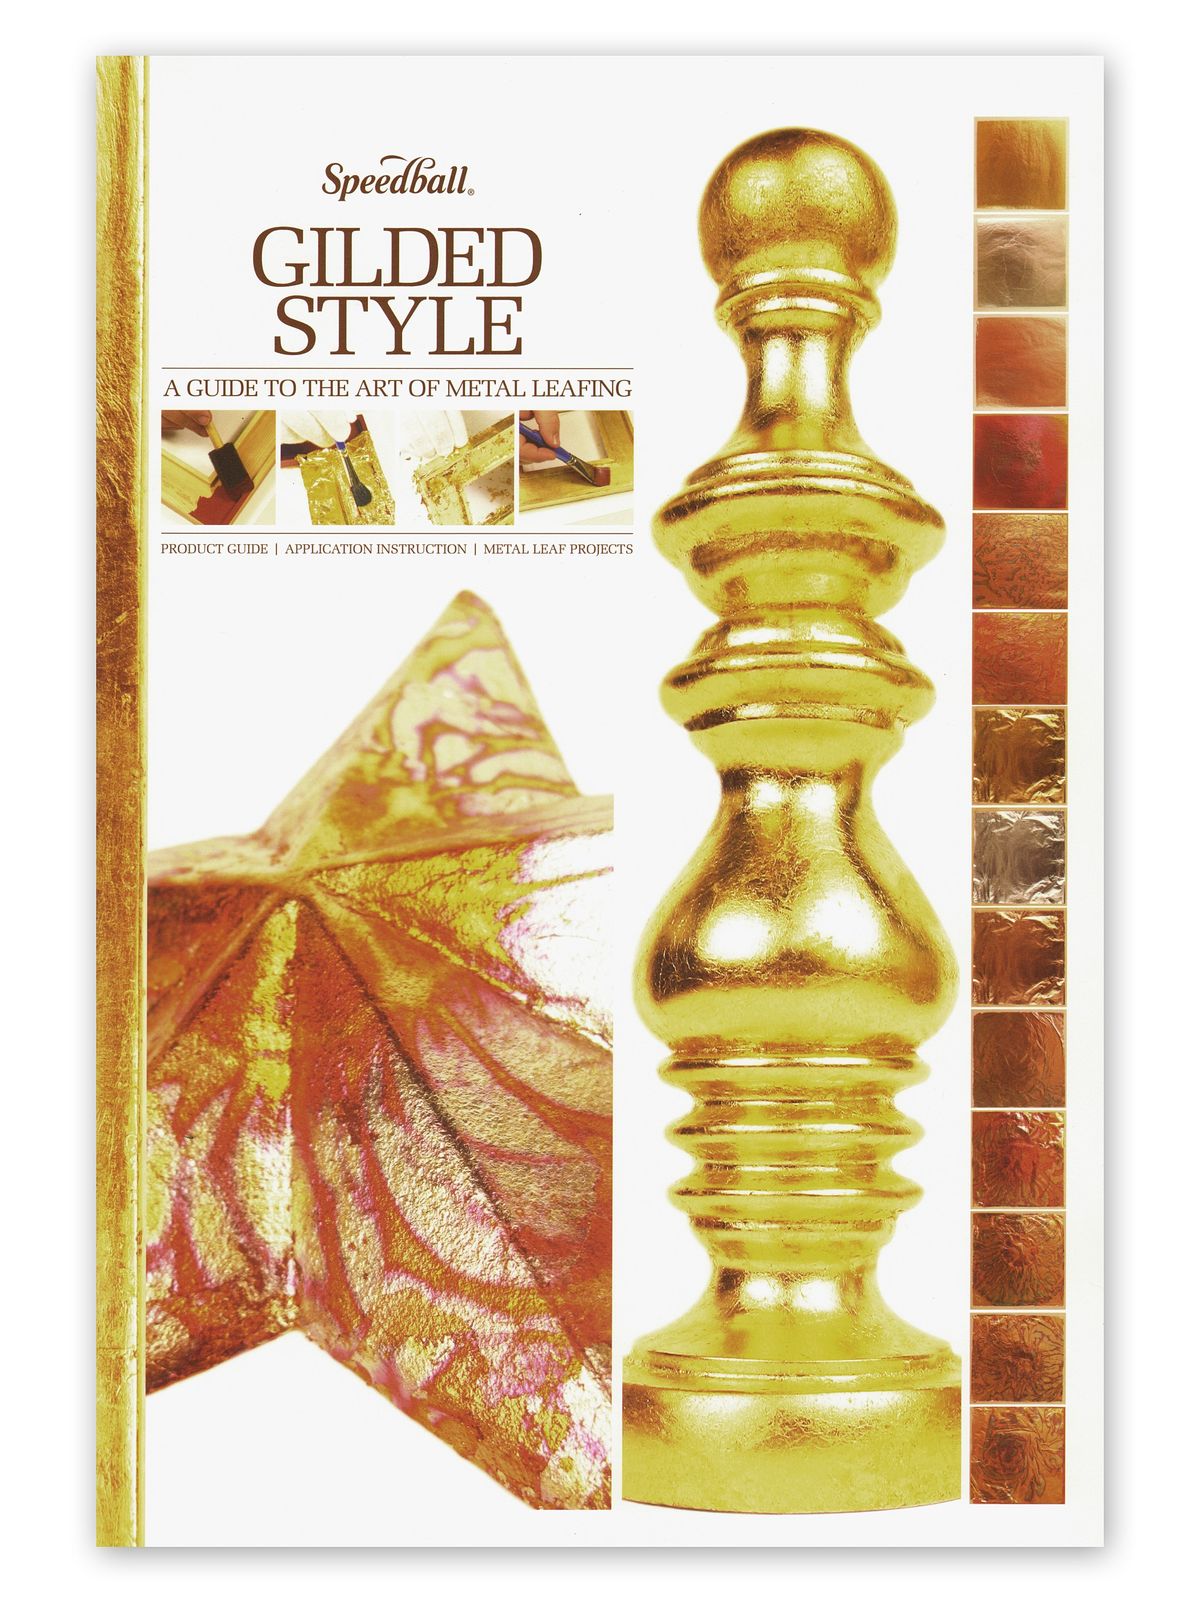 Gilded Style: A Guide To The Art Of Metal Leafing Gilded Style: A Guide To The Art Of Metal Leafing